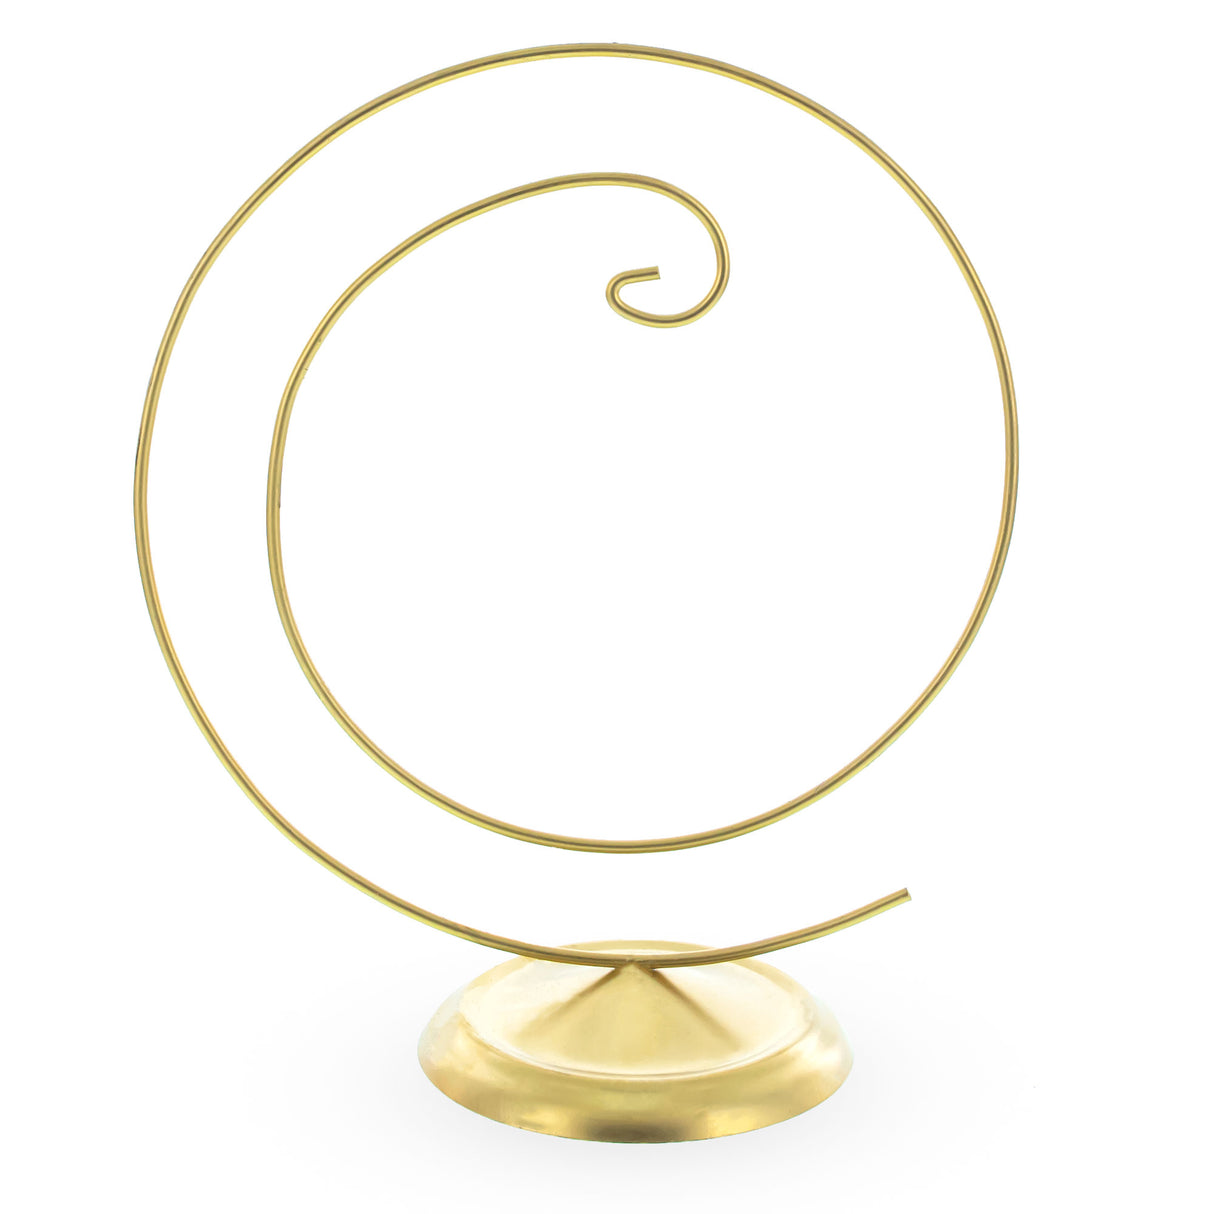 Elegant Spiral Gold Metal Solid Round Base Ornament Display Stand 4 Inches in Gold color,  shape